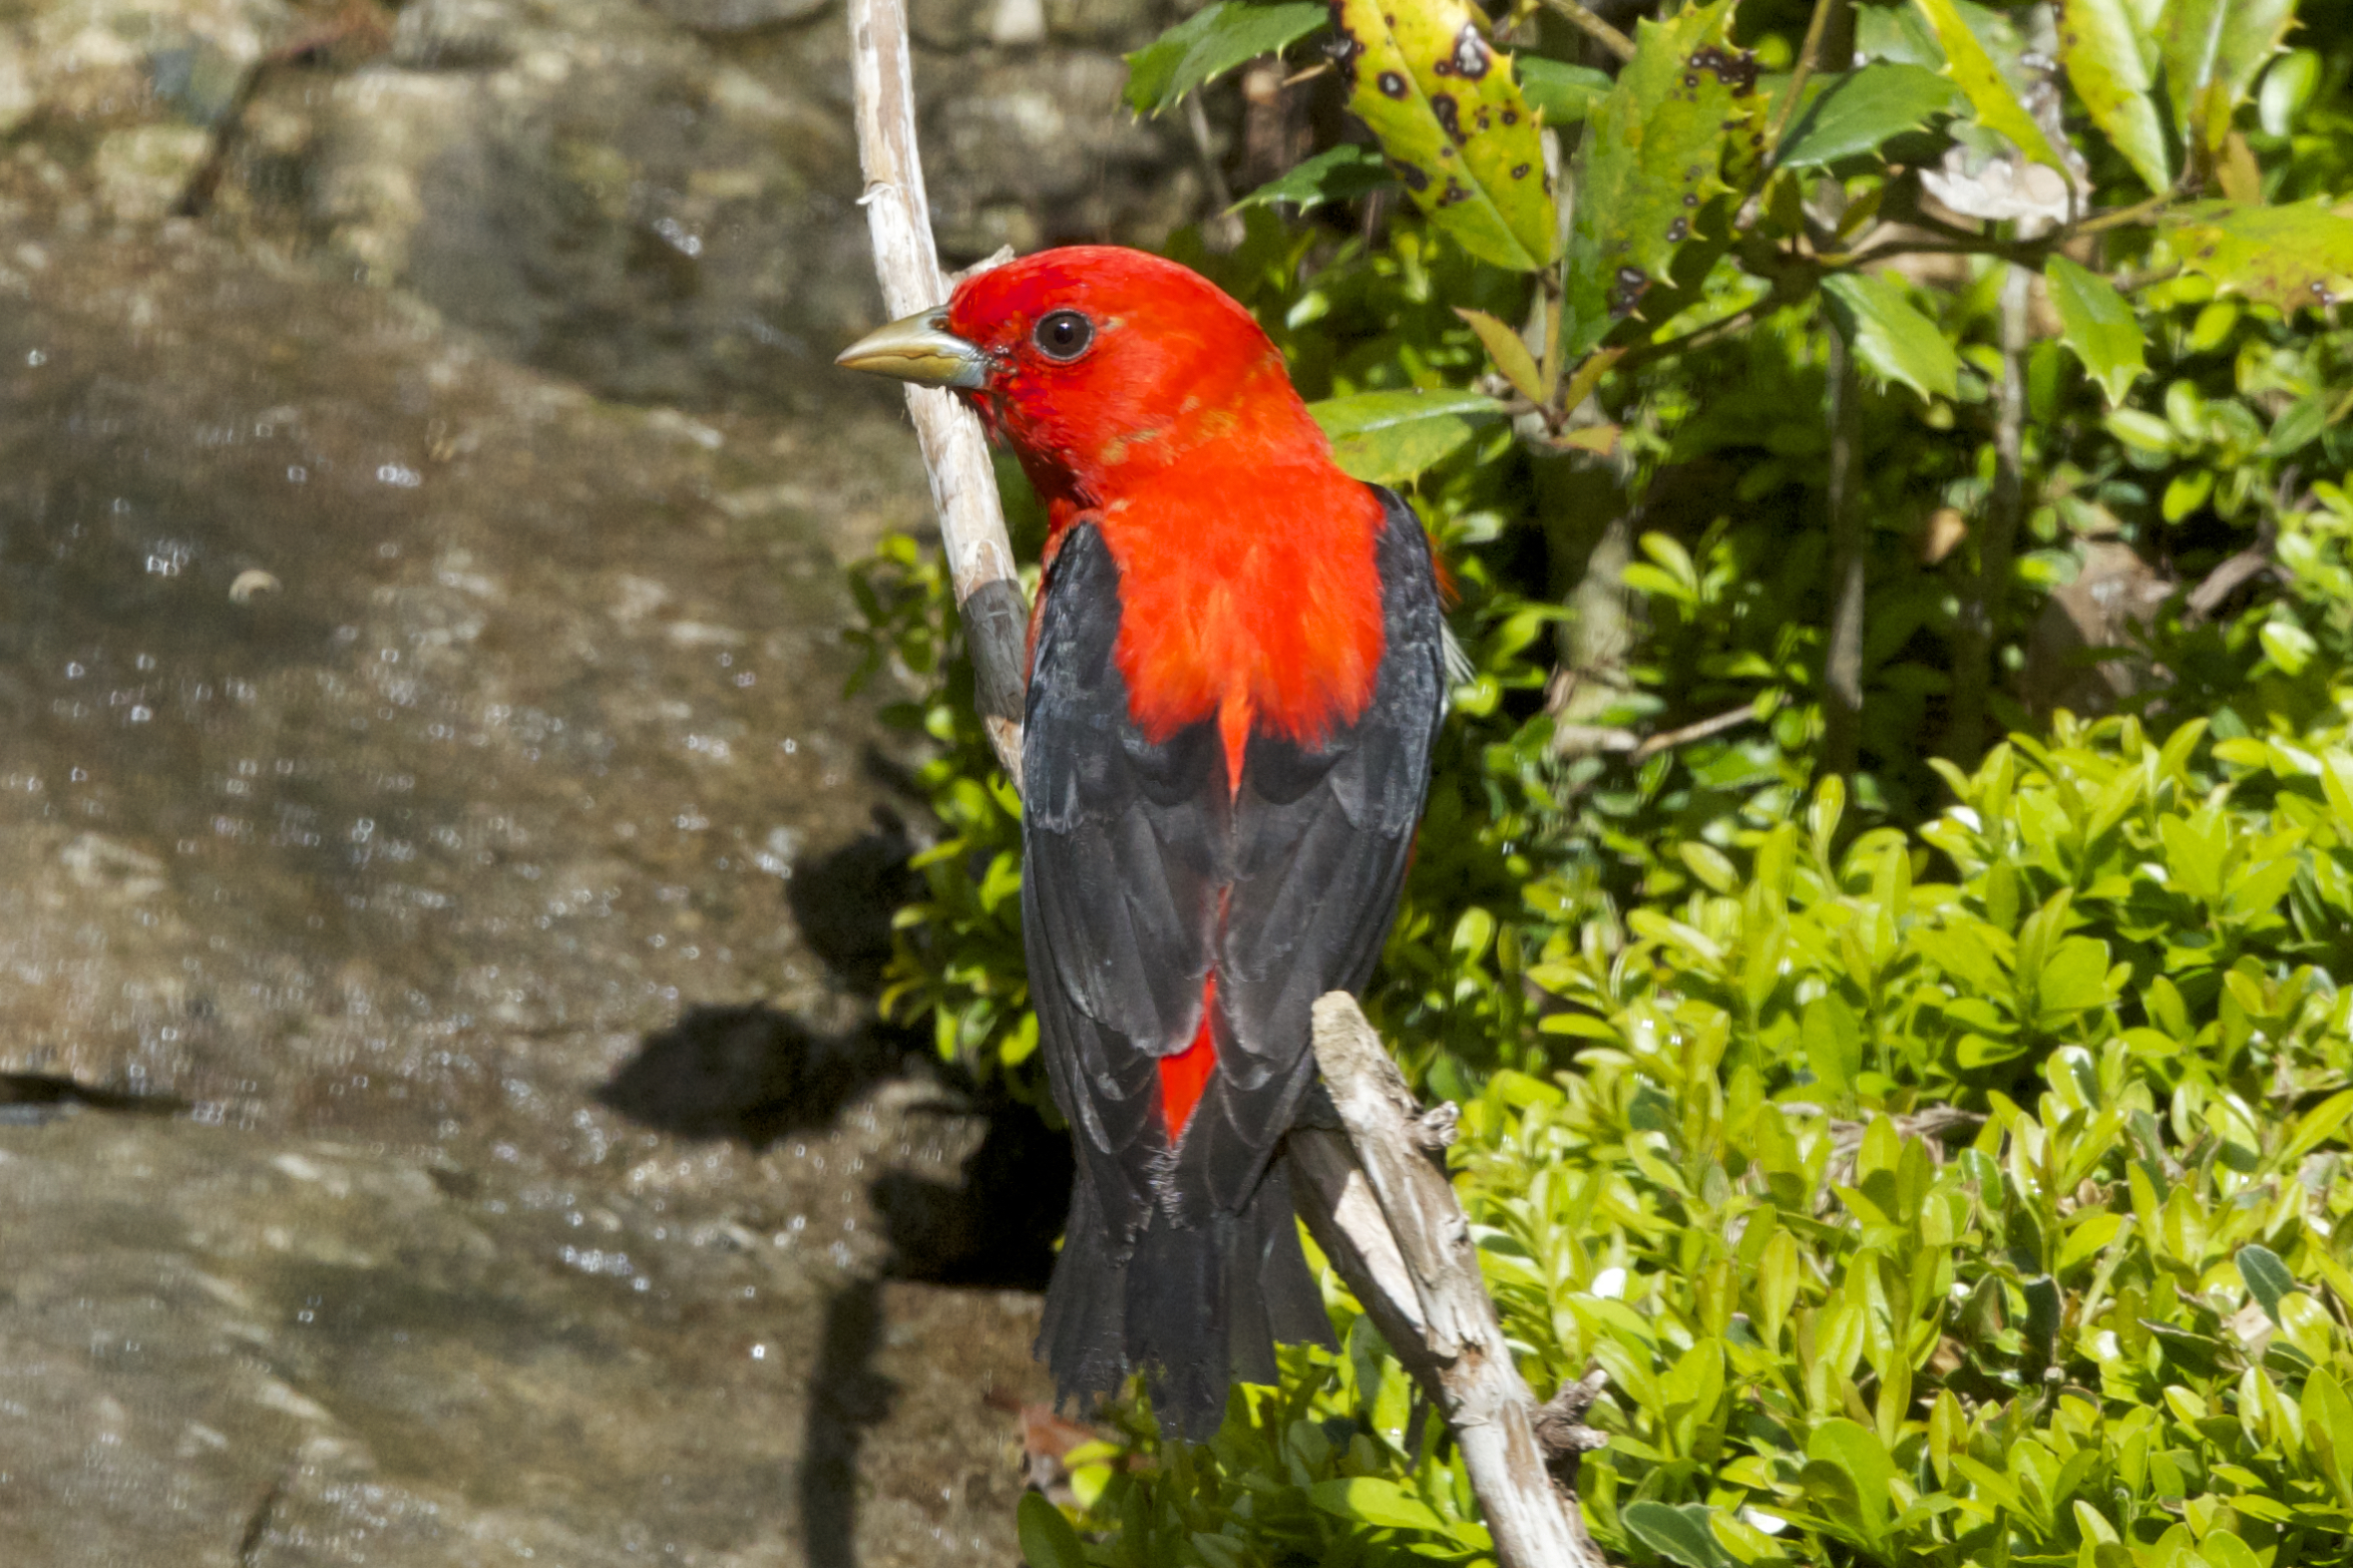 Scarlet Tanager-male before molting process. (Breeding Plumage)